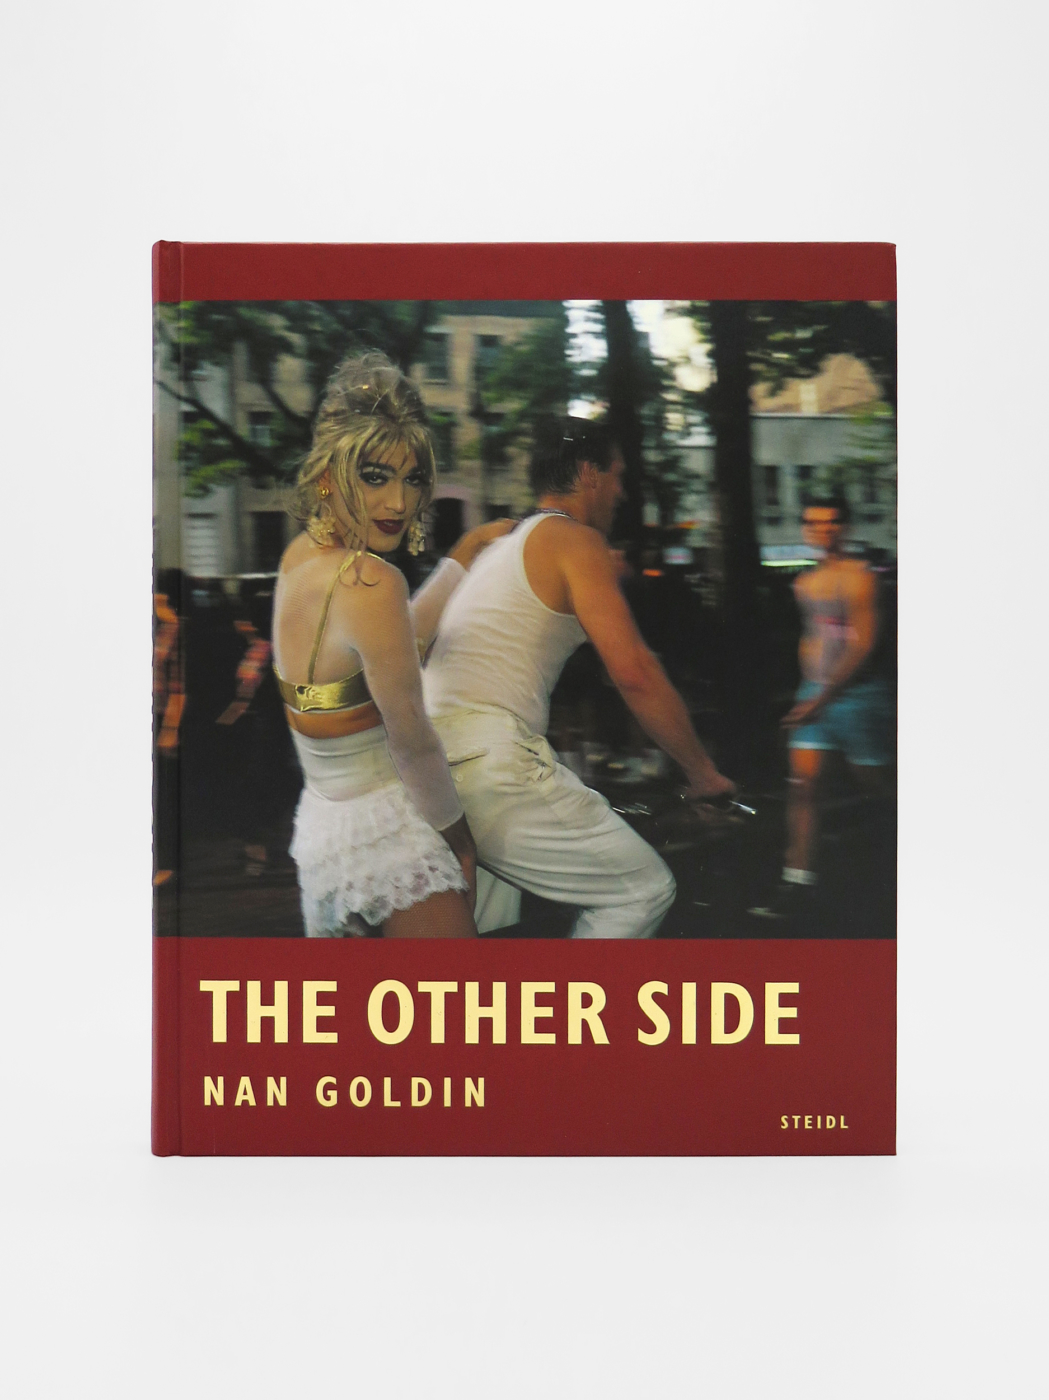 Nan Goldin, The Other Side